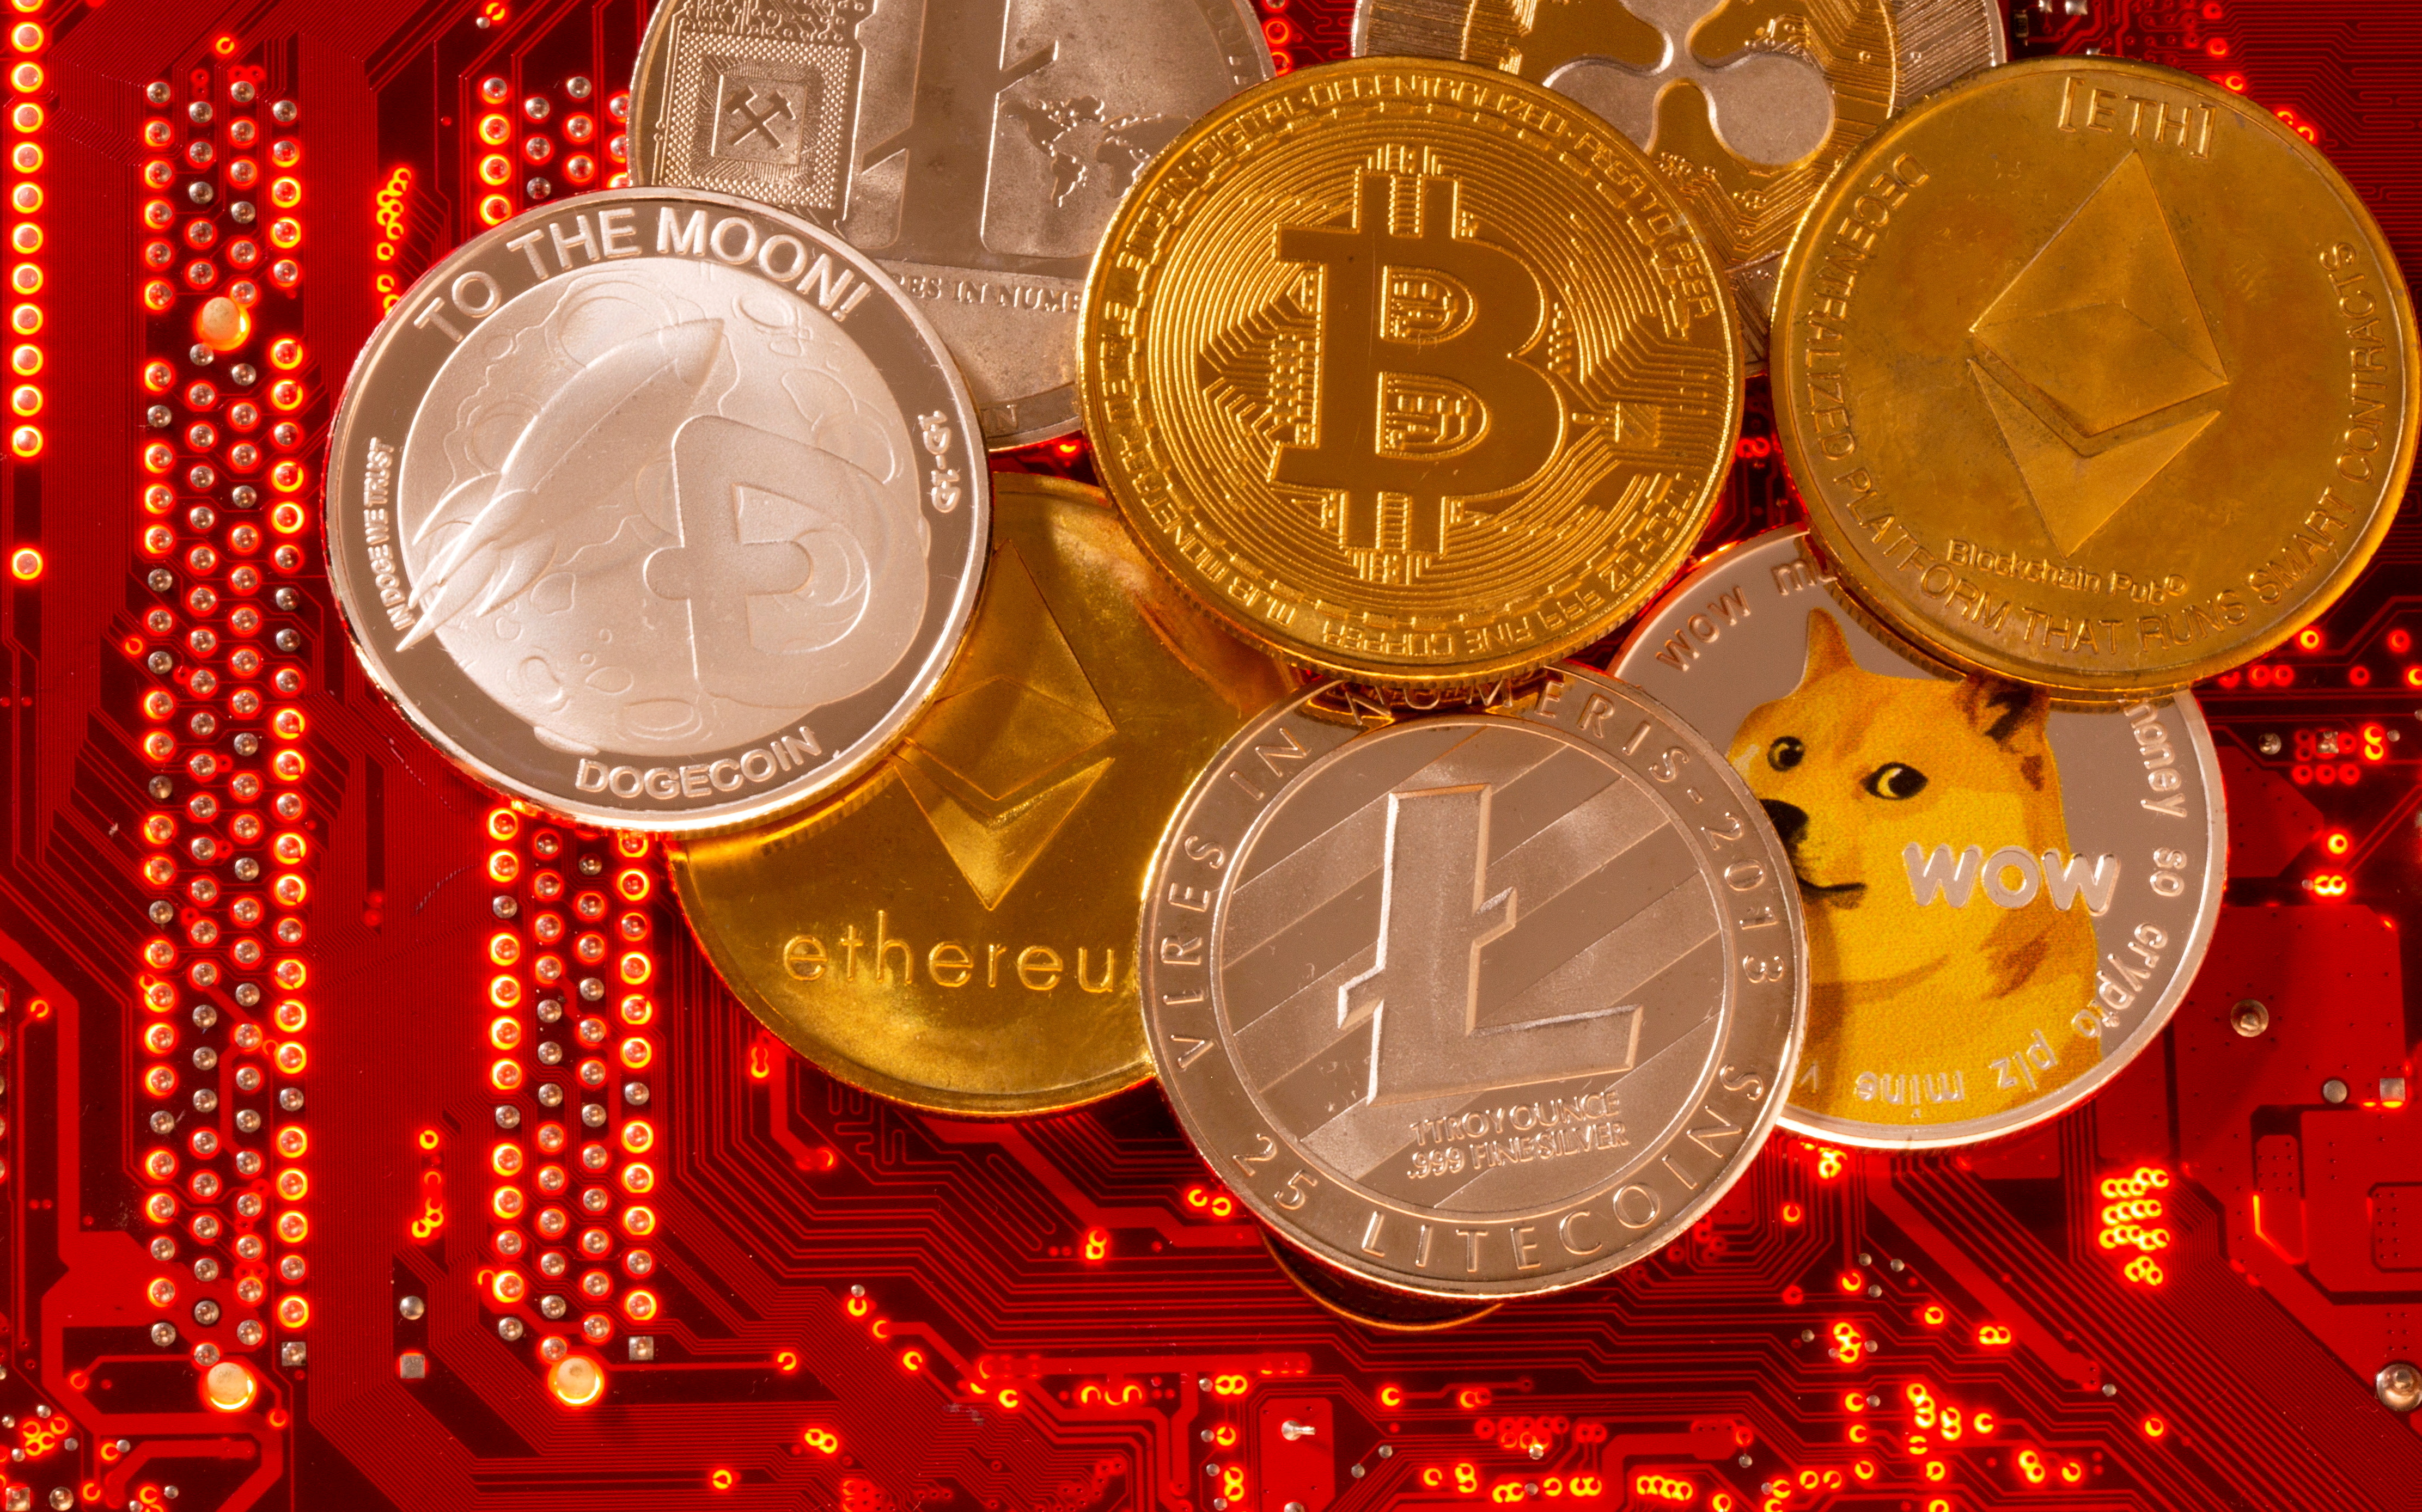 FILE PHOTO: FILE PHOTO: Representations of cryptocurrencies Bitcoin, Ethereum, DogeCoin, Ripple, Litecoin are placed on PC motherboard in this illustration taken, June 29, 2021. REUTERS/Dado Ruvic/Illustration//File Photo/File Photo